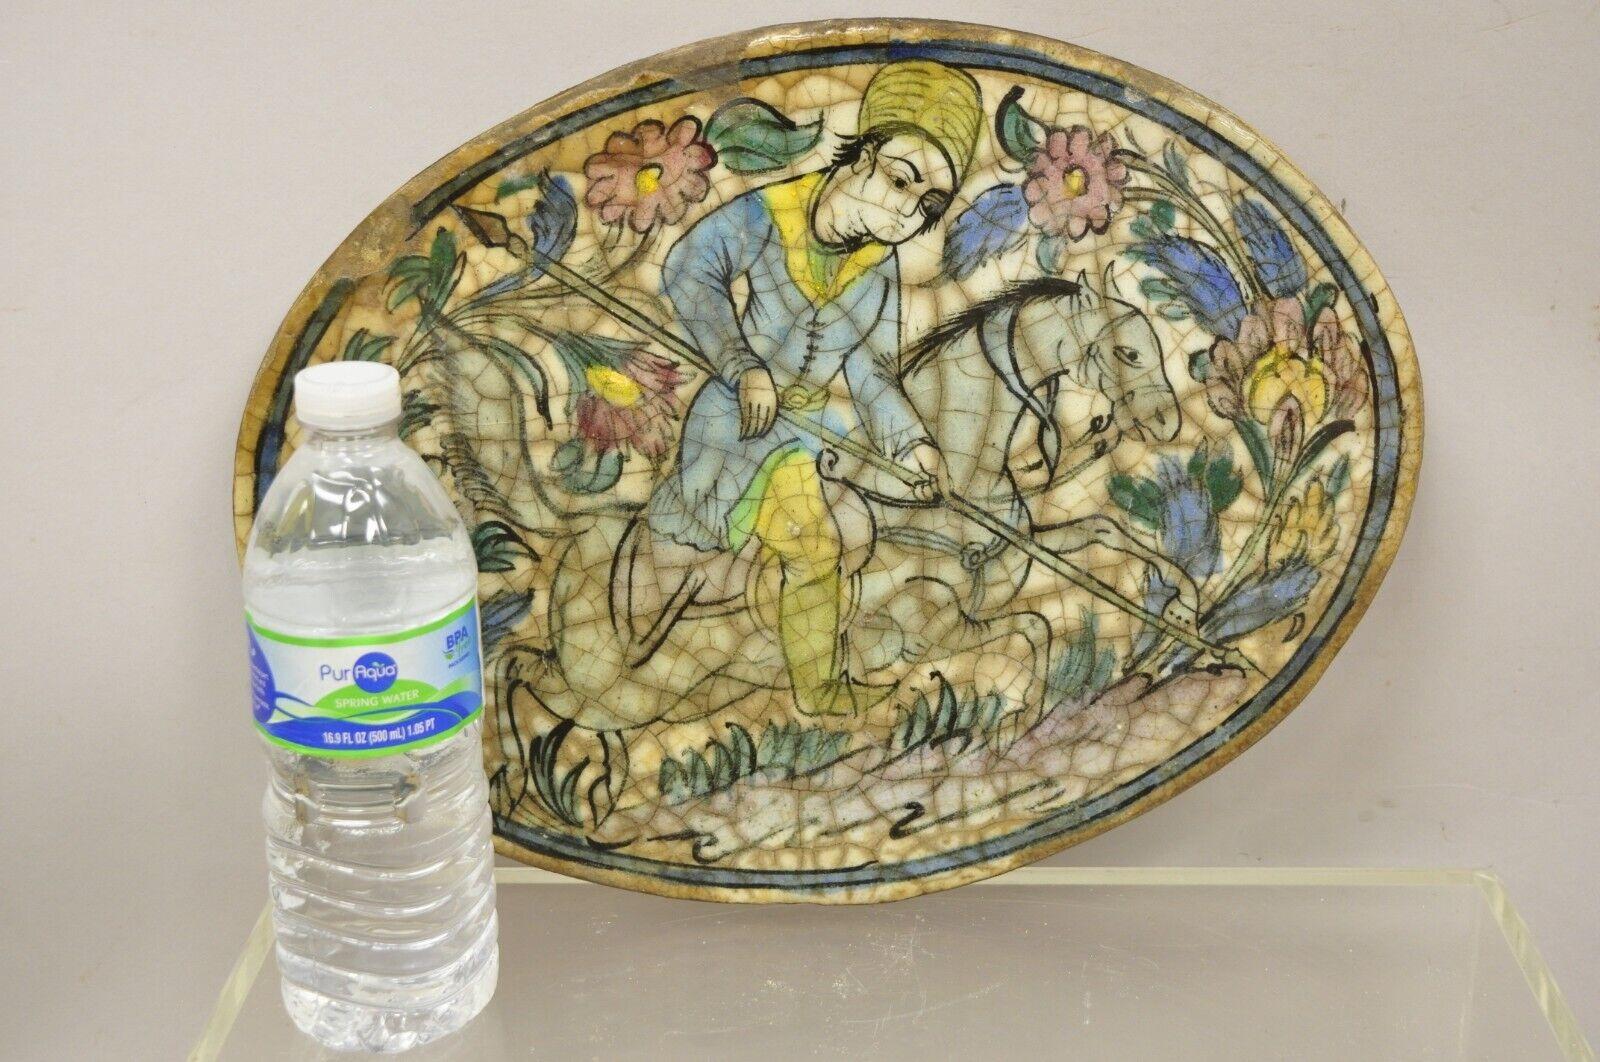 Antique Persian Iznik Qajar style ceramic pottery blue oval horse rider tile C3. Item features original crackle glazed finish, heavy ceramic pottery construction, very impressive detail, wonderful style and form. Great to mount as wall art or accent